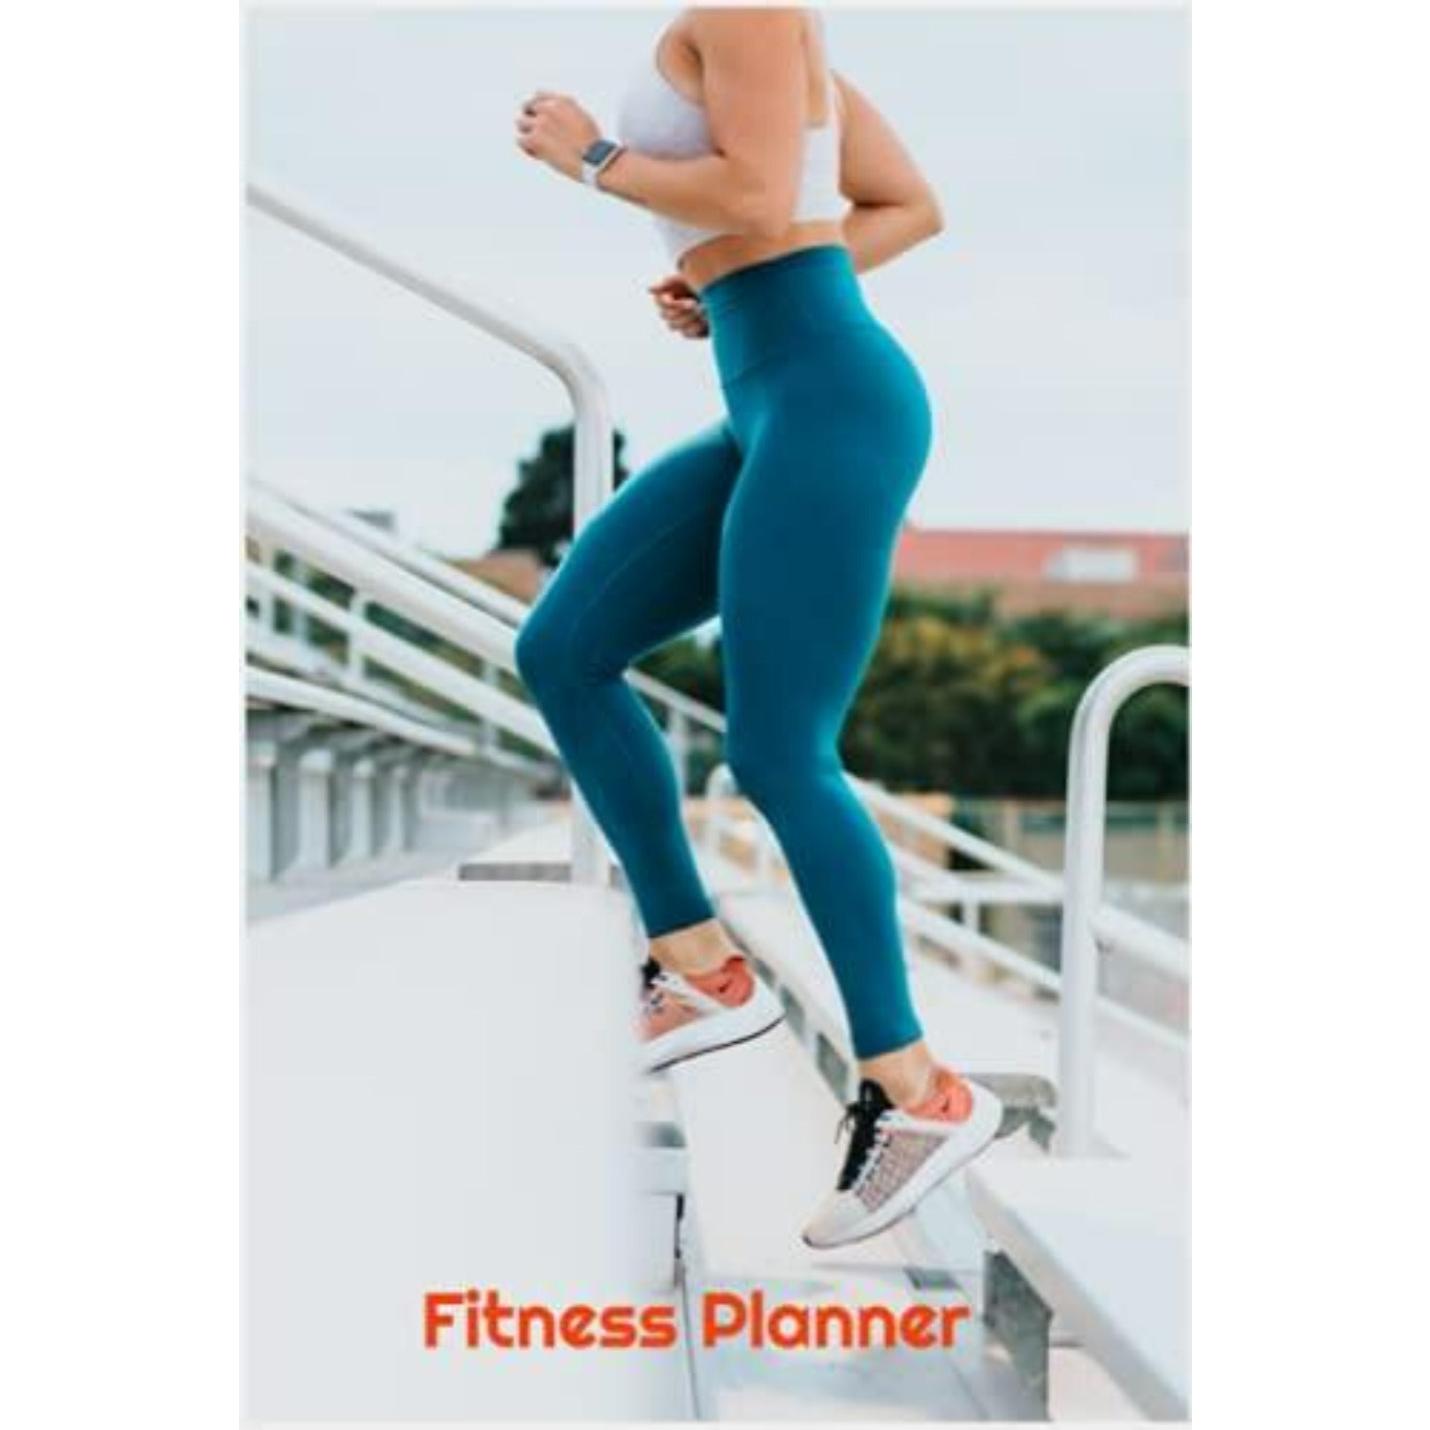 Fitness mate/Fitness Planner - happygetfit.com